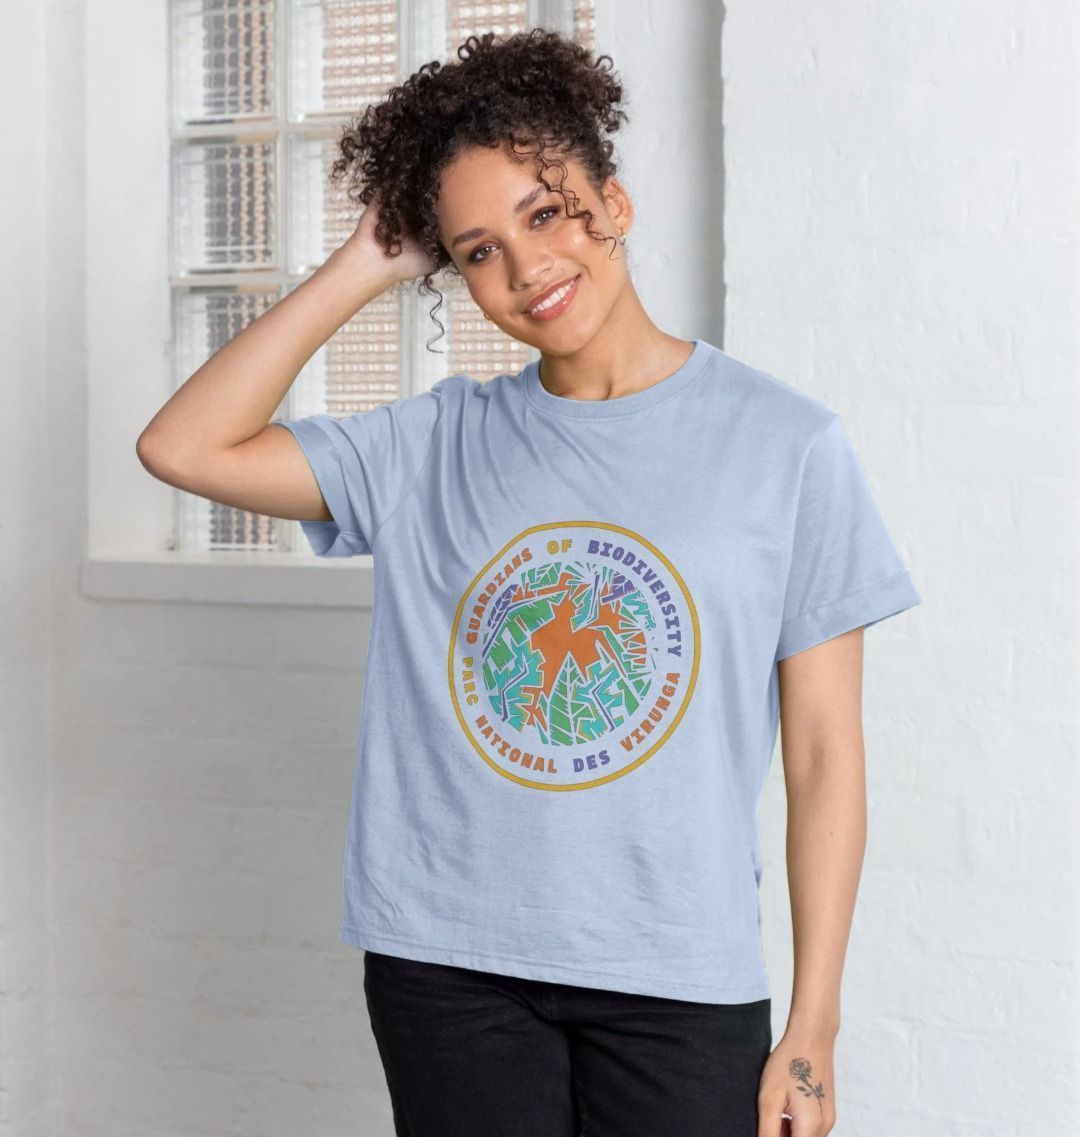 Guardians of Biodiversity Women's Relaxed Tee